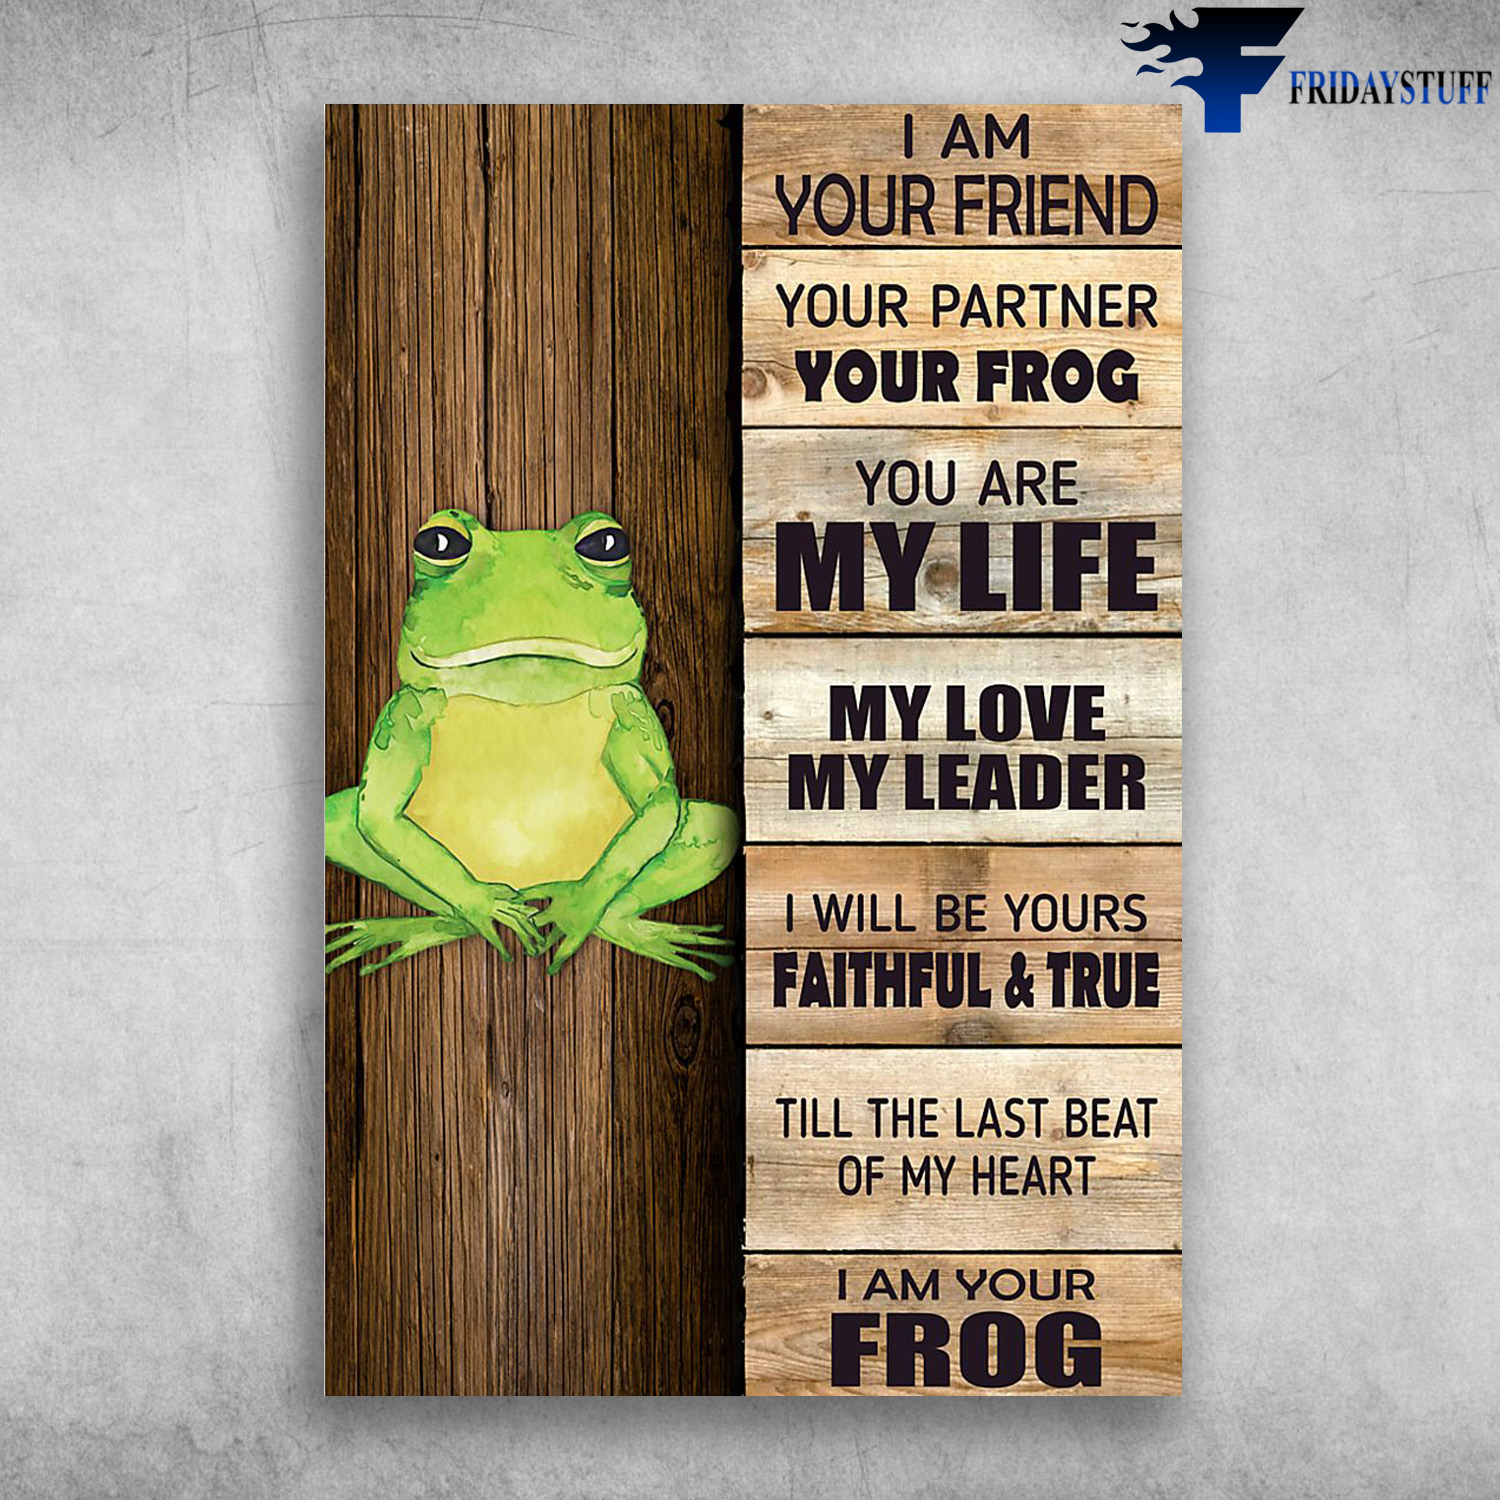 The Frog - I Am Your Friend, Your Partner, Your Frog, You Are My Life, My Love, My Leader, I Will Be Yours Faithfull And True, Till The Last Beat Of My Heart, I Am Your Frog